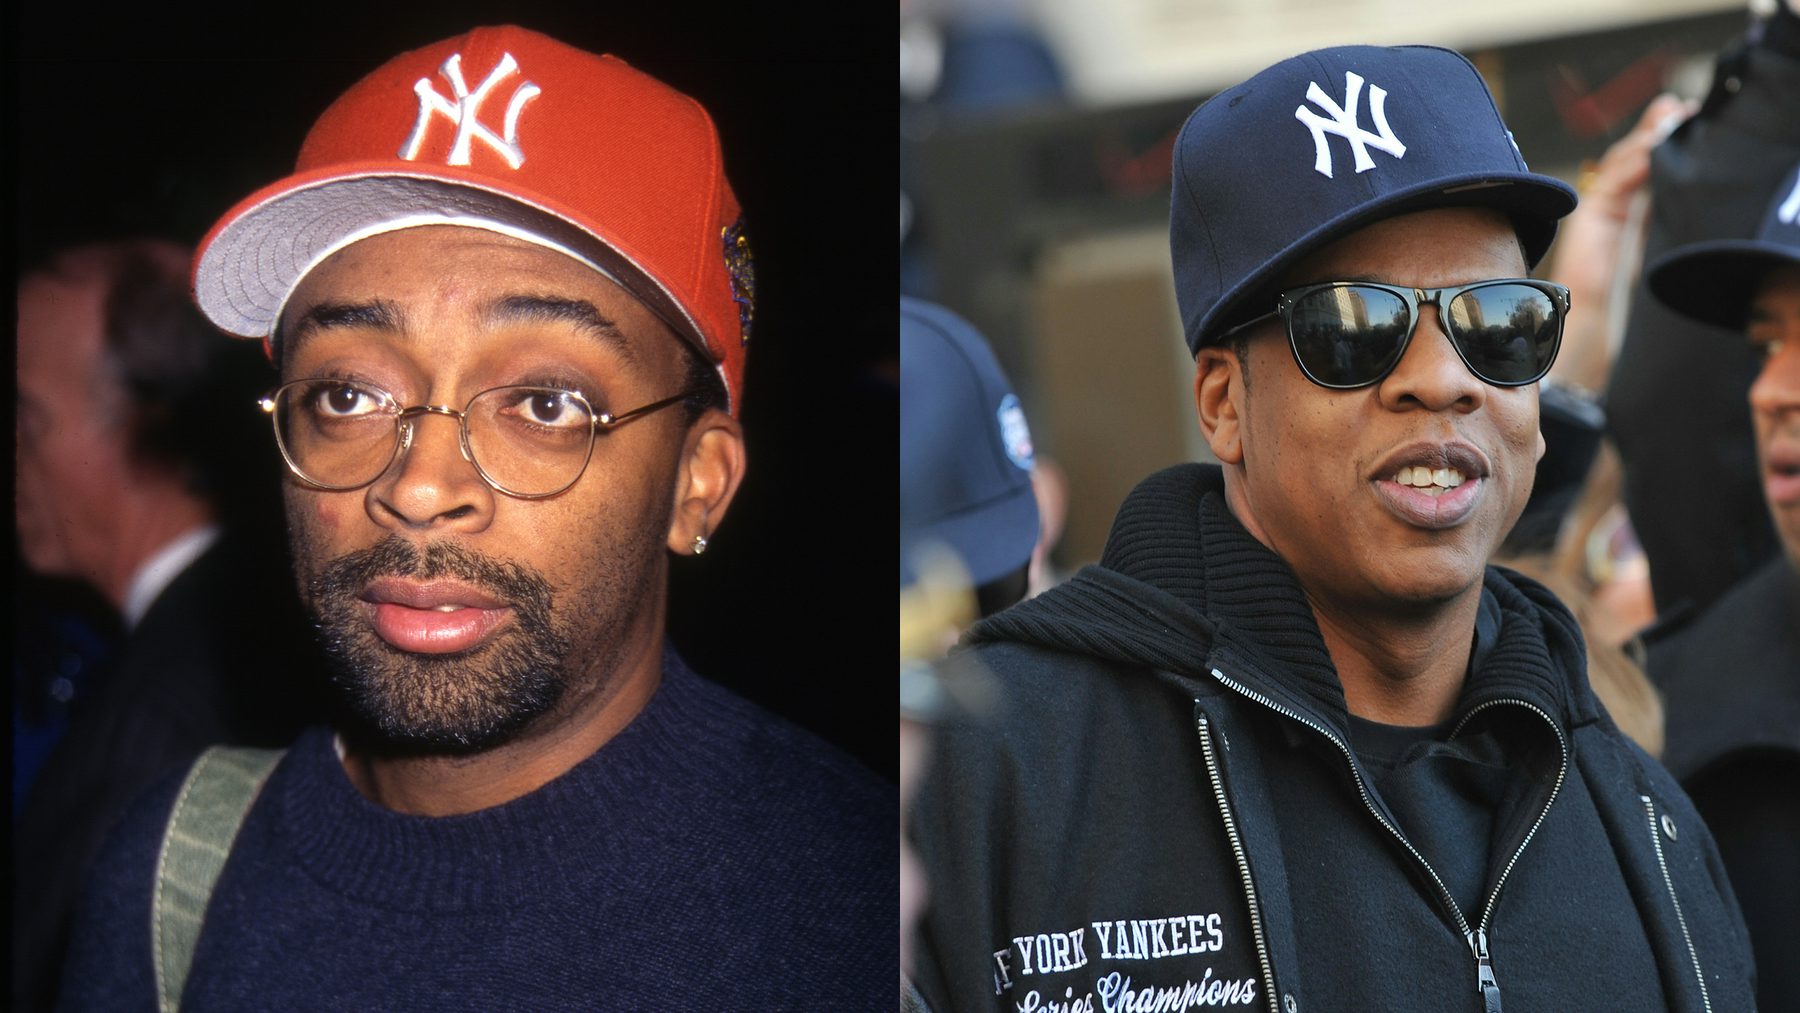 Left: Film director Spike Lee, wearing a red New York Yankees baseball cap at a fashion show in 1998; Right: Jay-Z attends the New York Yankees World Series victory parade in 2009. Getty Images.